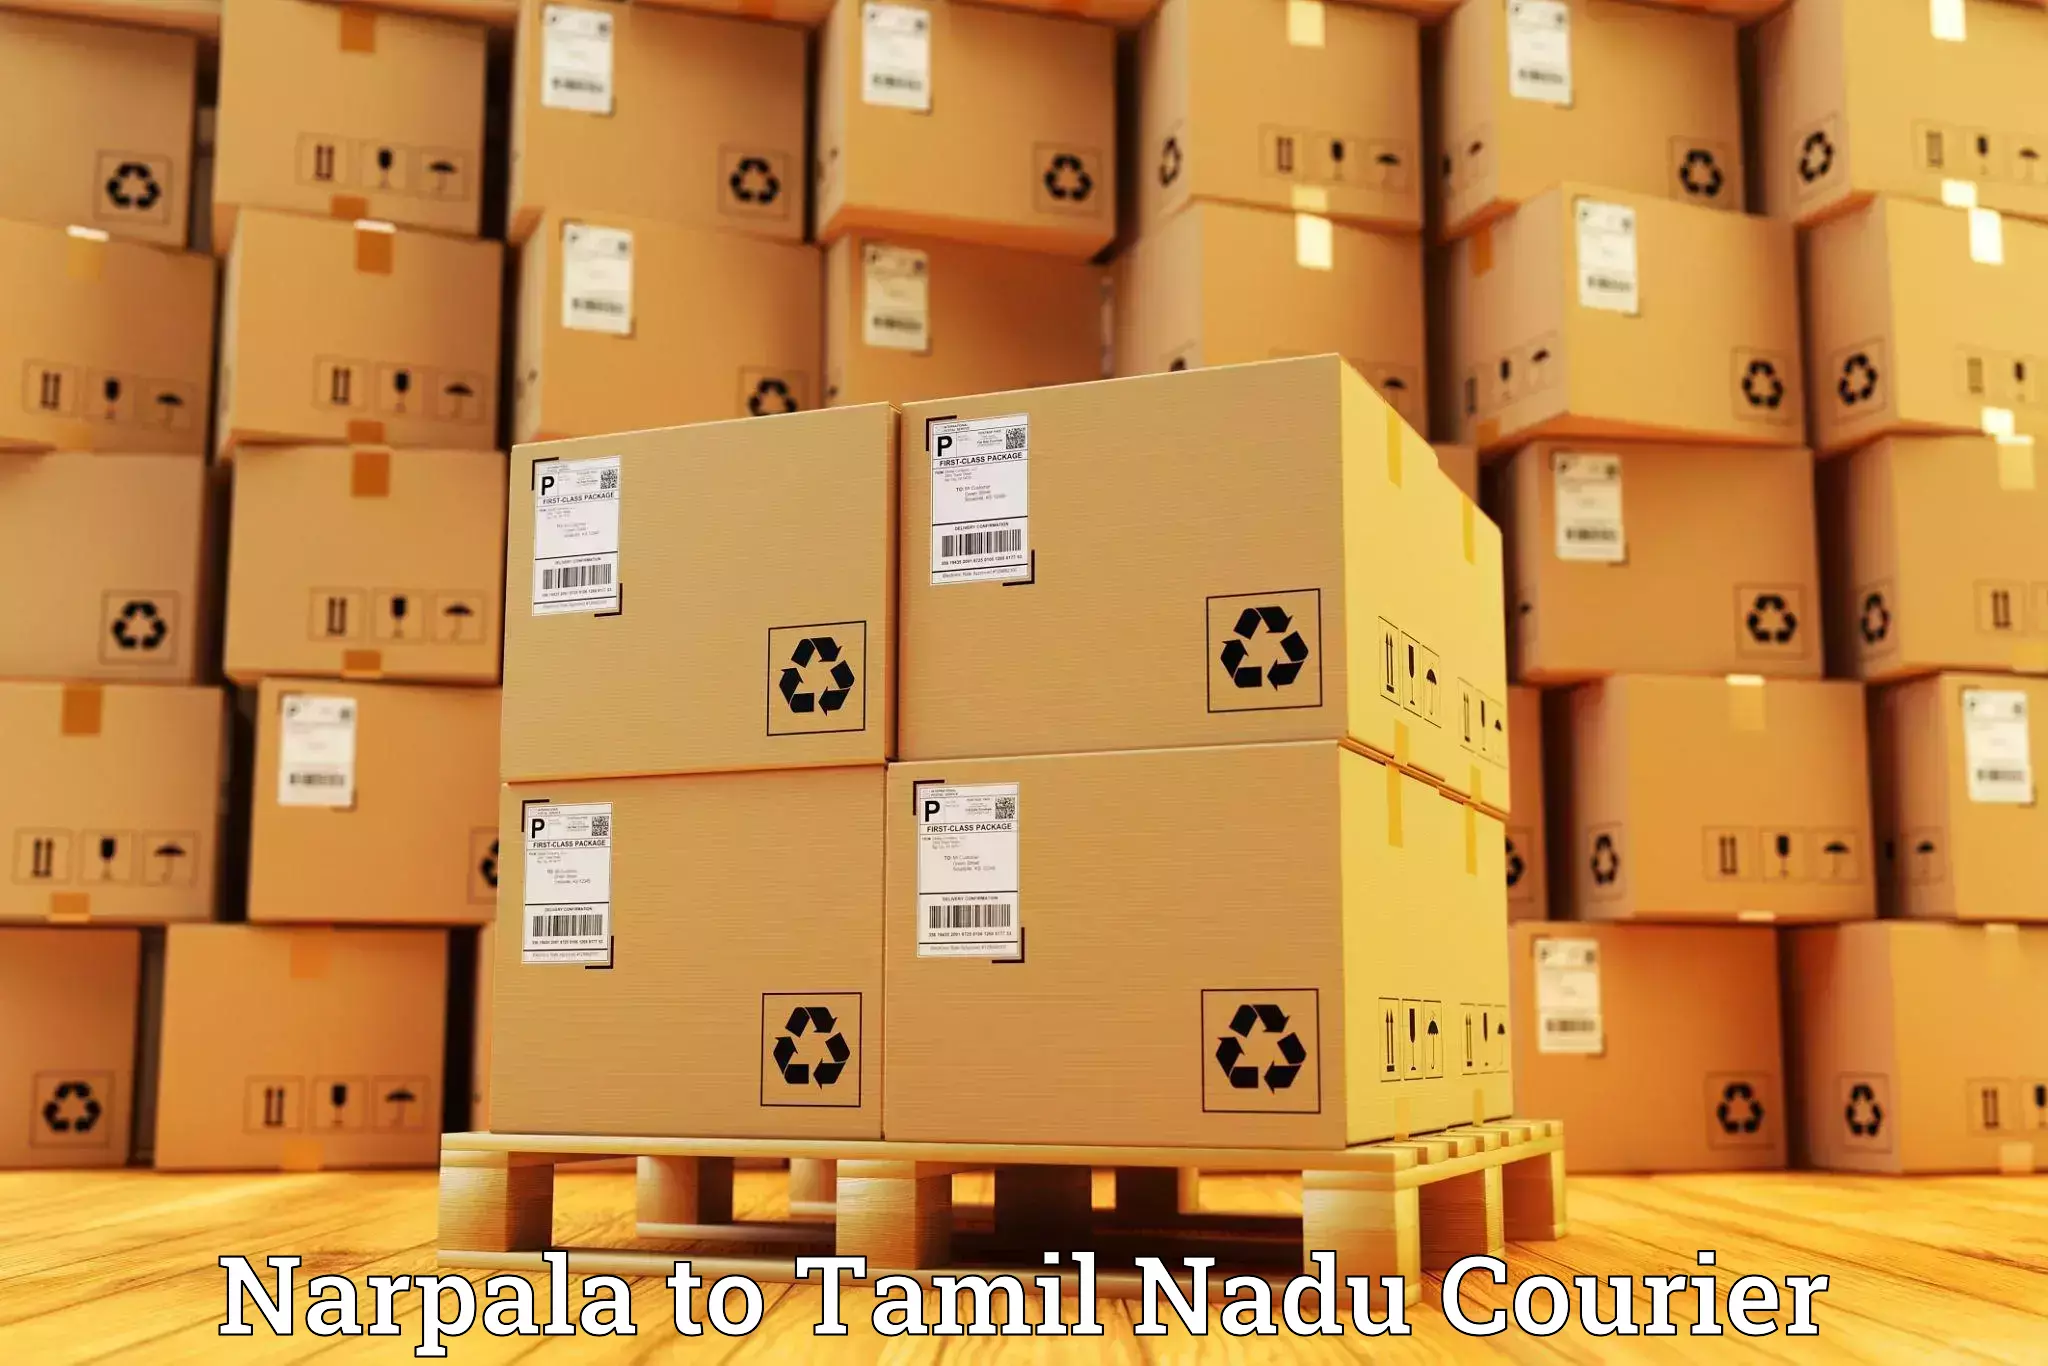 Global shipping networks Narpala to Ambattur